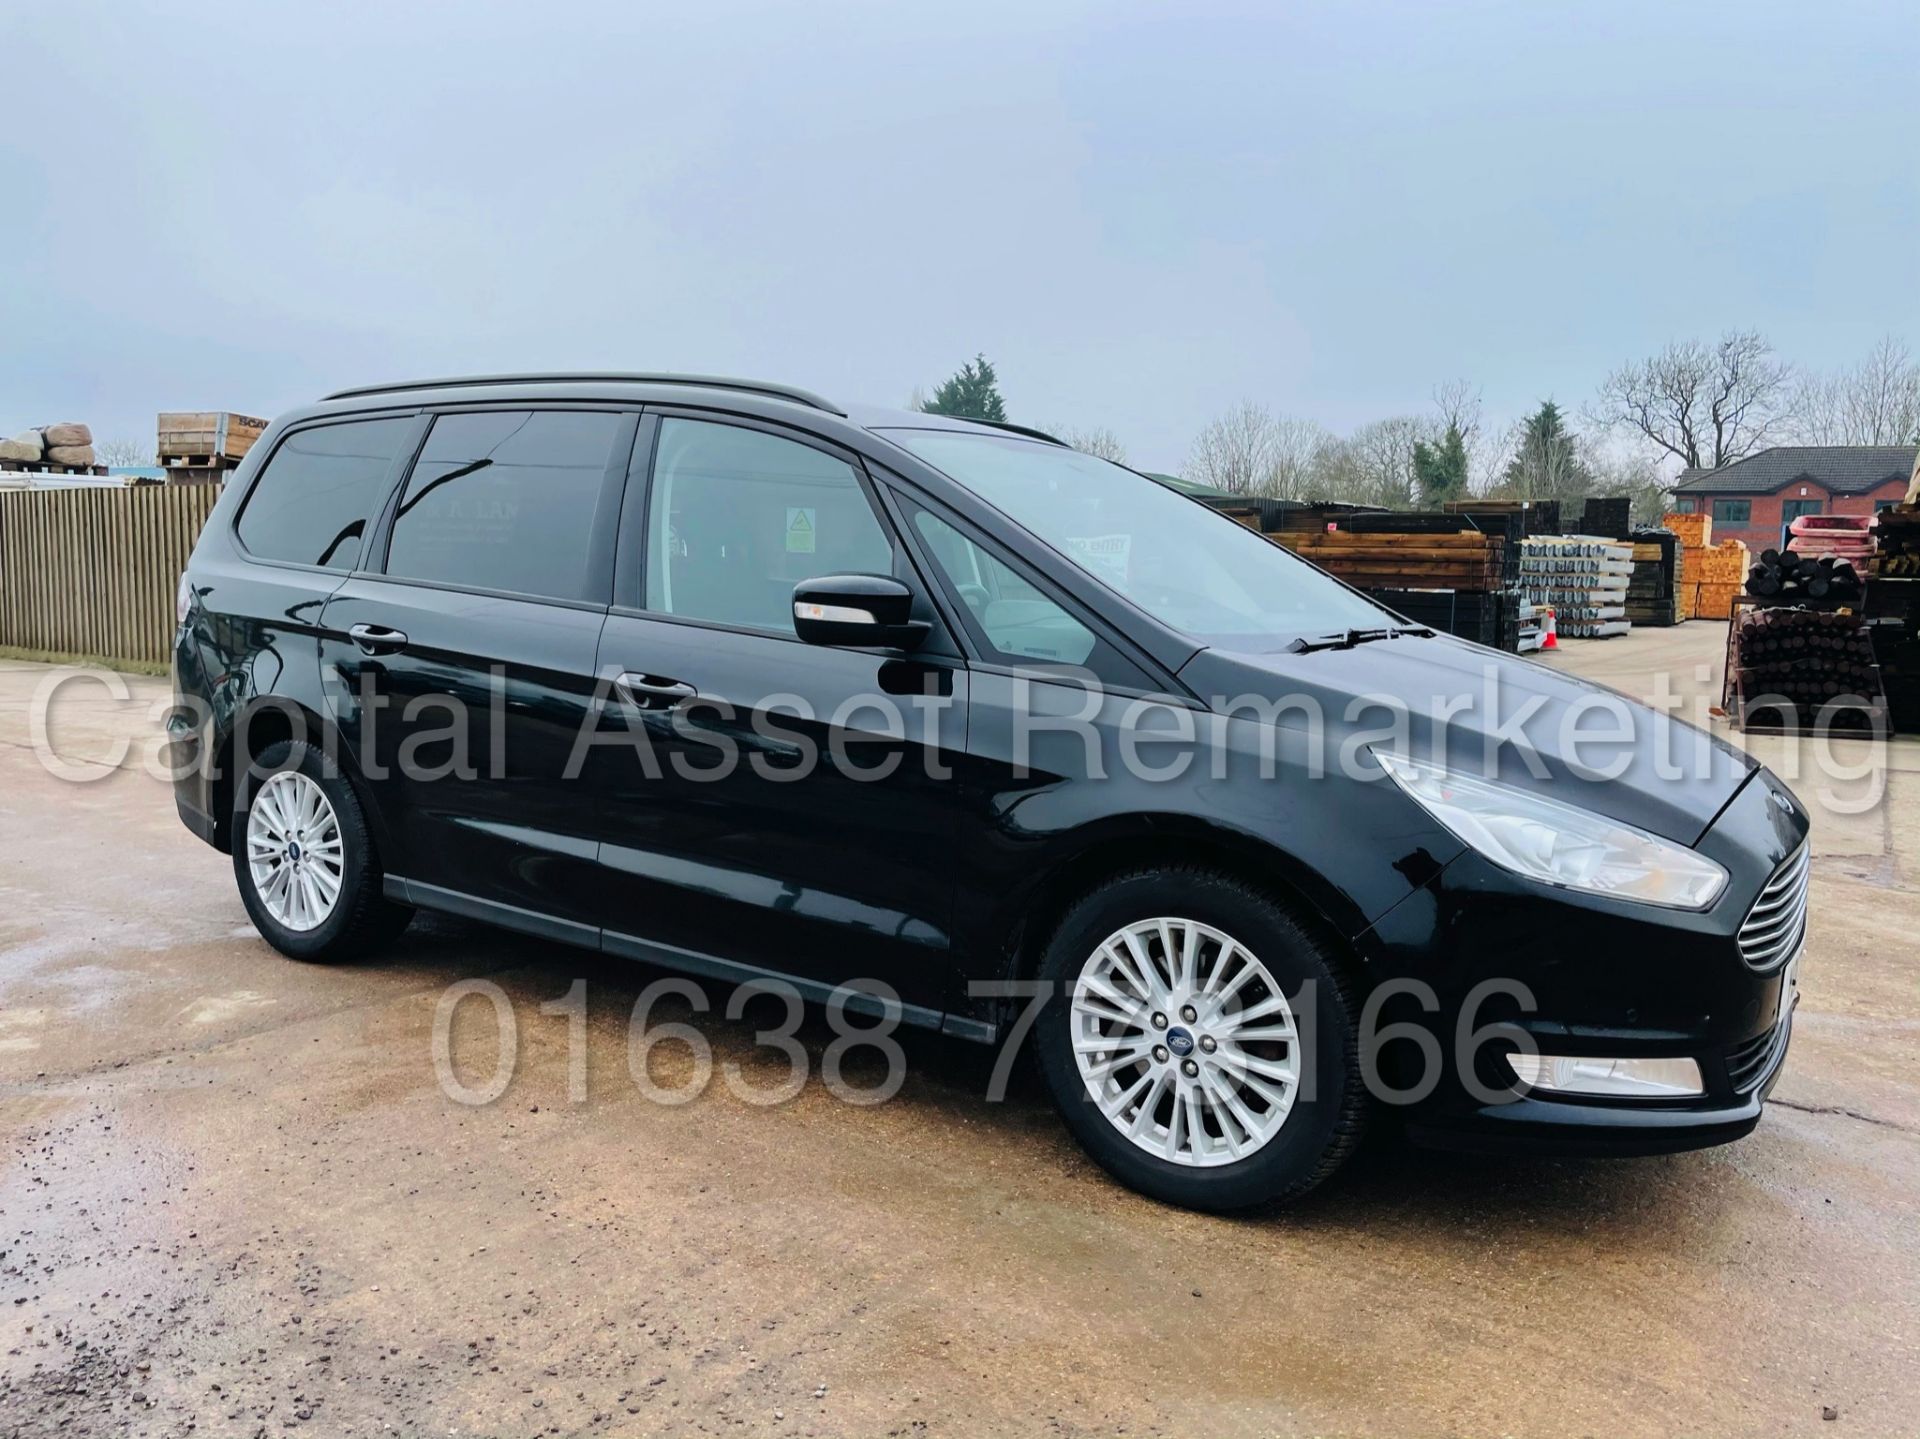 (ON SALE) FORD GALAXY *ZETEC EDITION* 7 SEATER MPV (2017 - EURO 6) '2.0 TDCI - AUTO' (1 OWNER) - Image 11 of 48